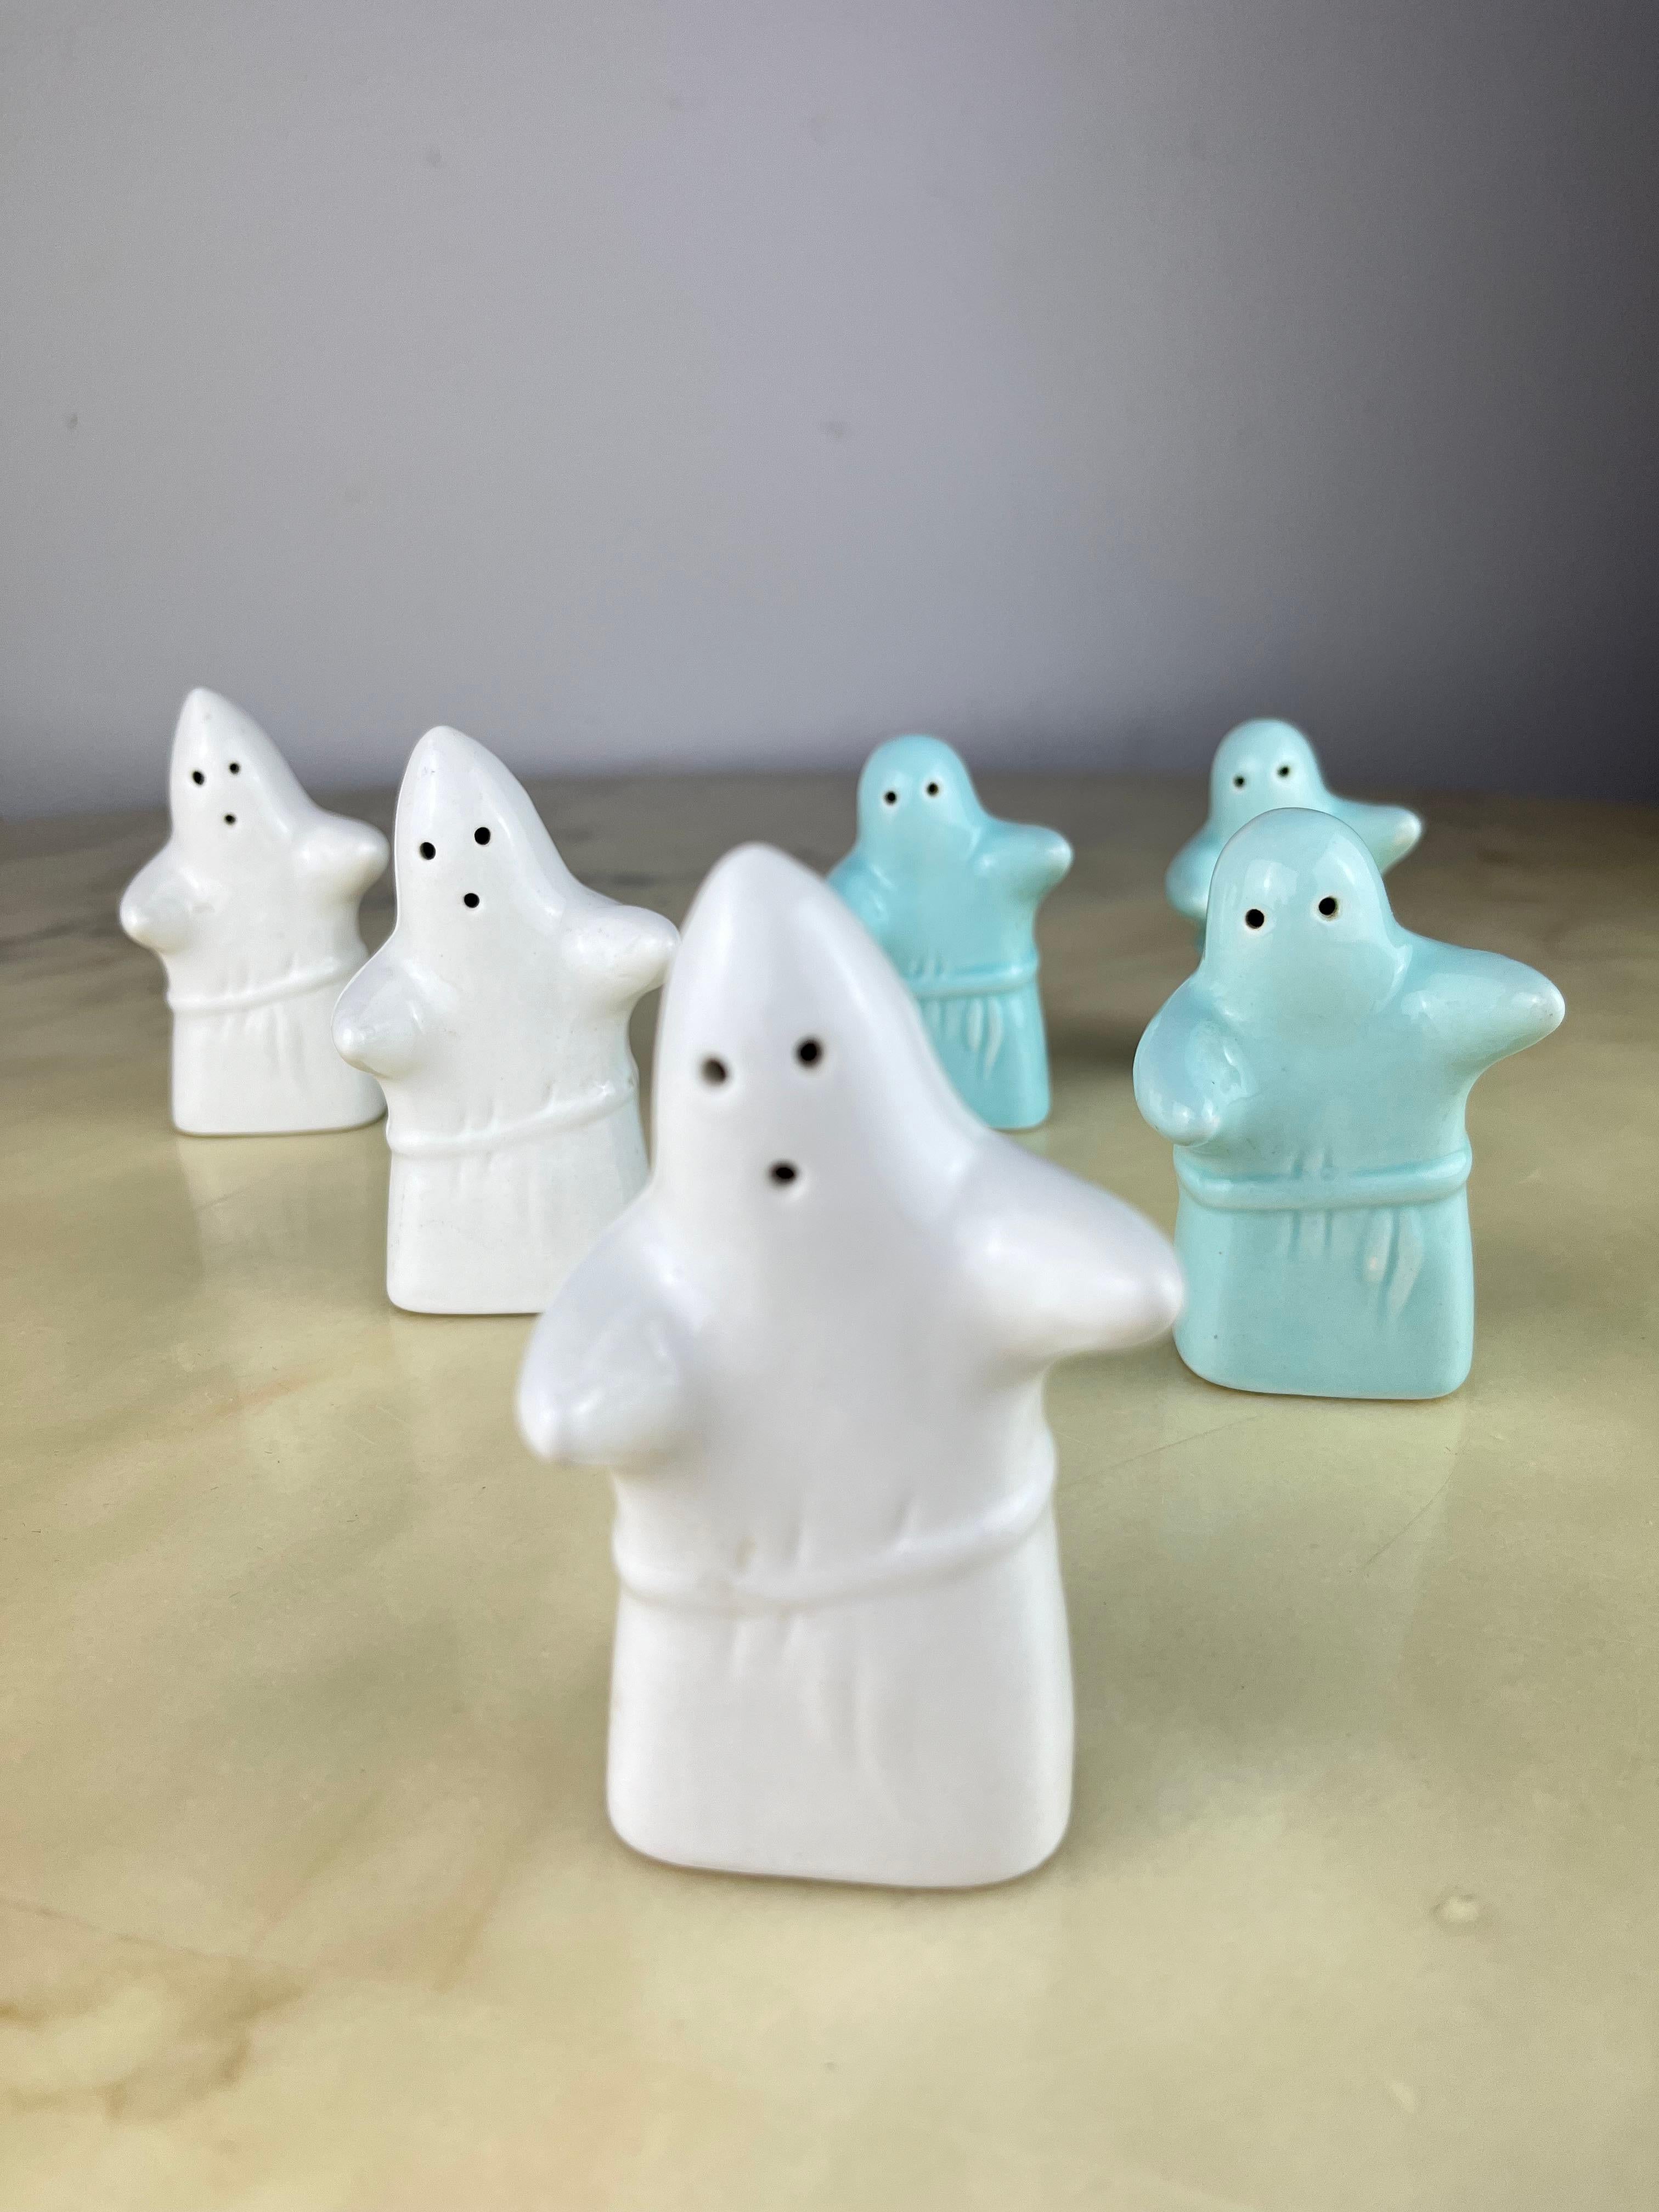 Set of 6 ghost salt and pepper dispensers, Italy, 1980s 
Porcelain. Excellent condition and will make your guests smile.